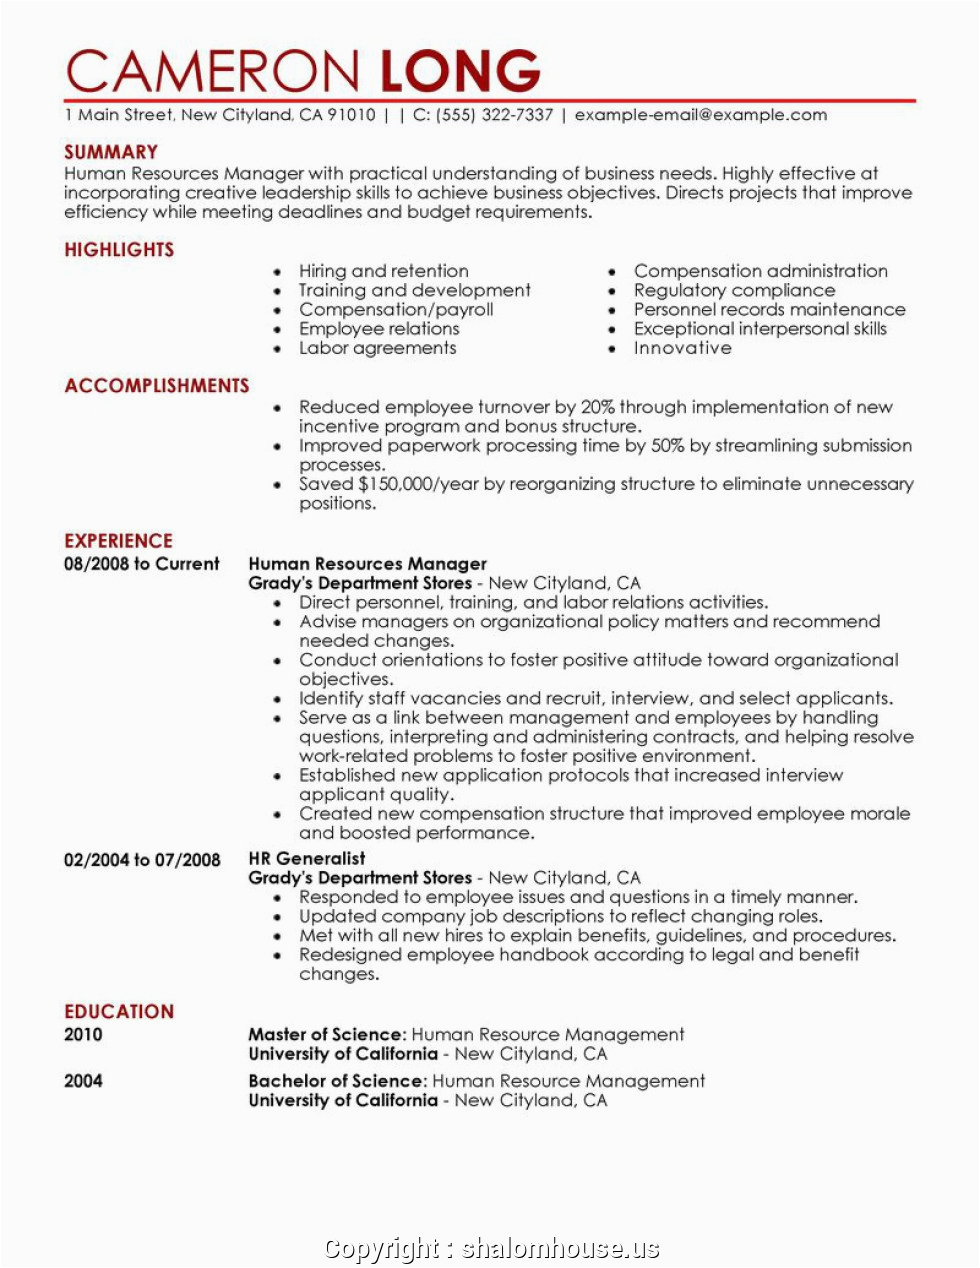 Resume Headline Samples for Human Resources Simple Human Resource Ficer Resume top 8 Chief Human